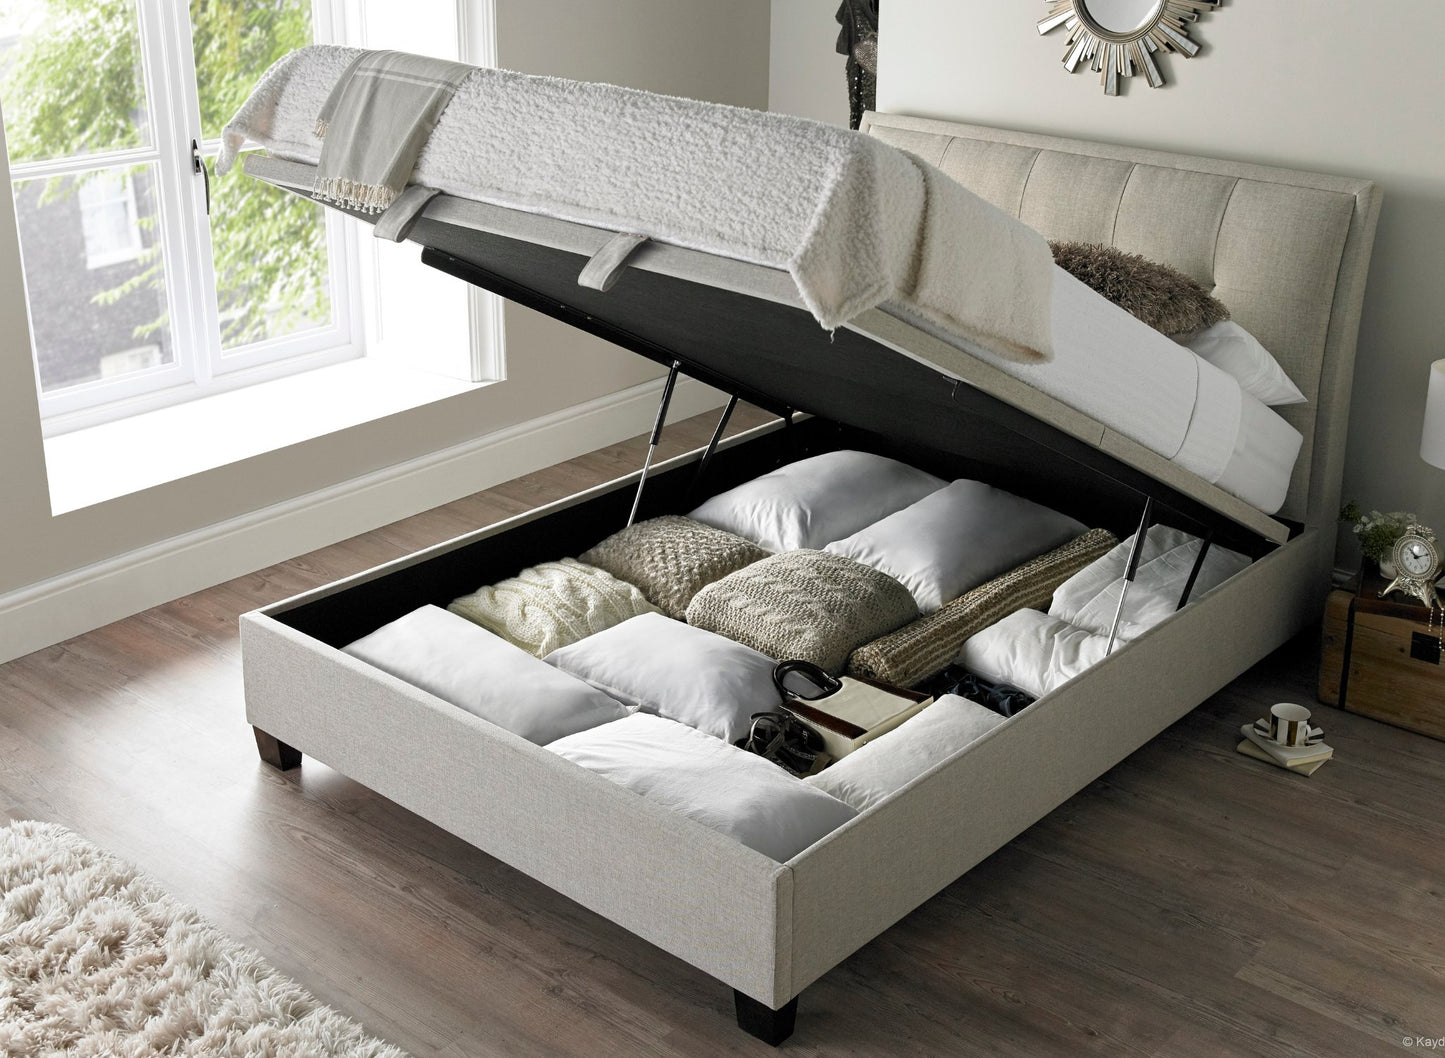 Accent Ottoman Storage Bed Frame - Oatmeal - TV Beds Northwest - ACC135OA - doubleottoman - doubleottomanstorage